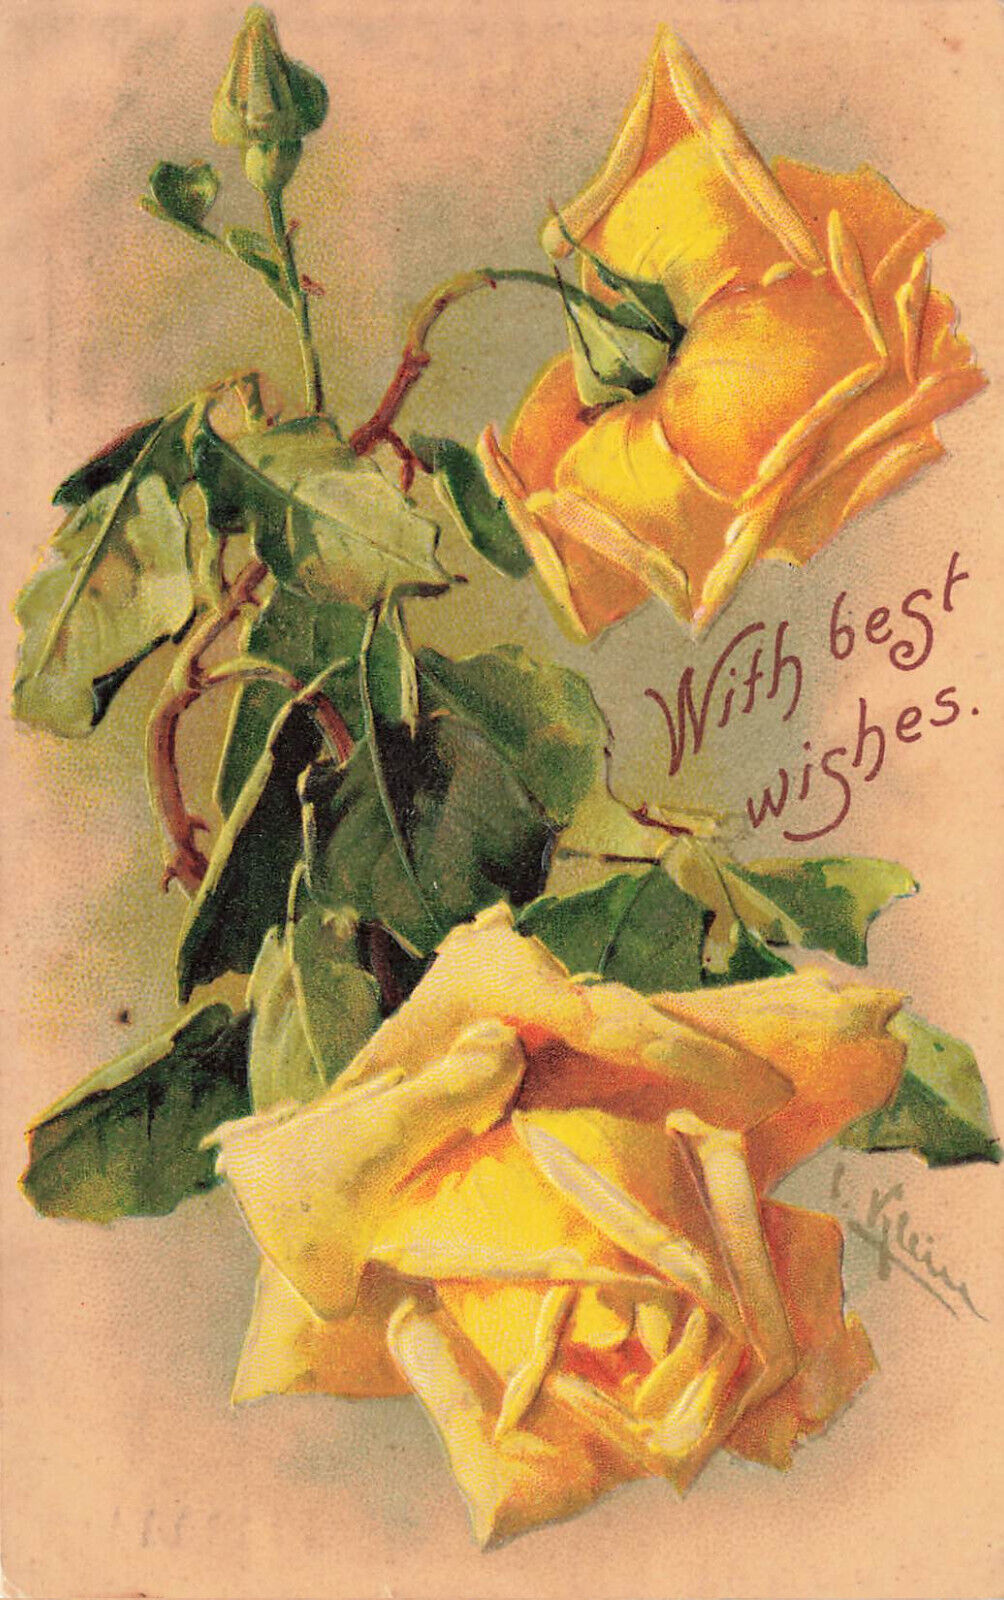 LOVELY VINTAGE A/S C KLEIN YELLOW ROSE EMBOSSED GREETINGS POSTCARD 1908 011823 S